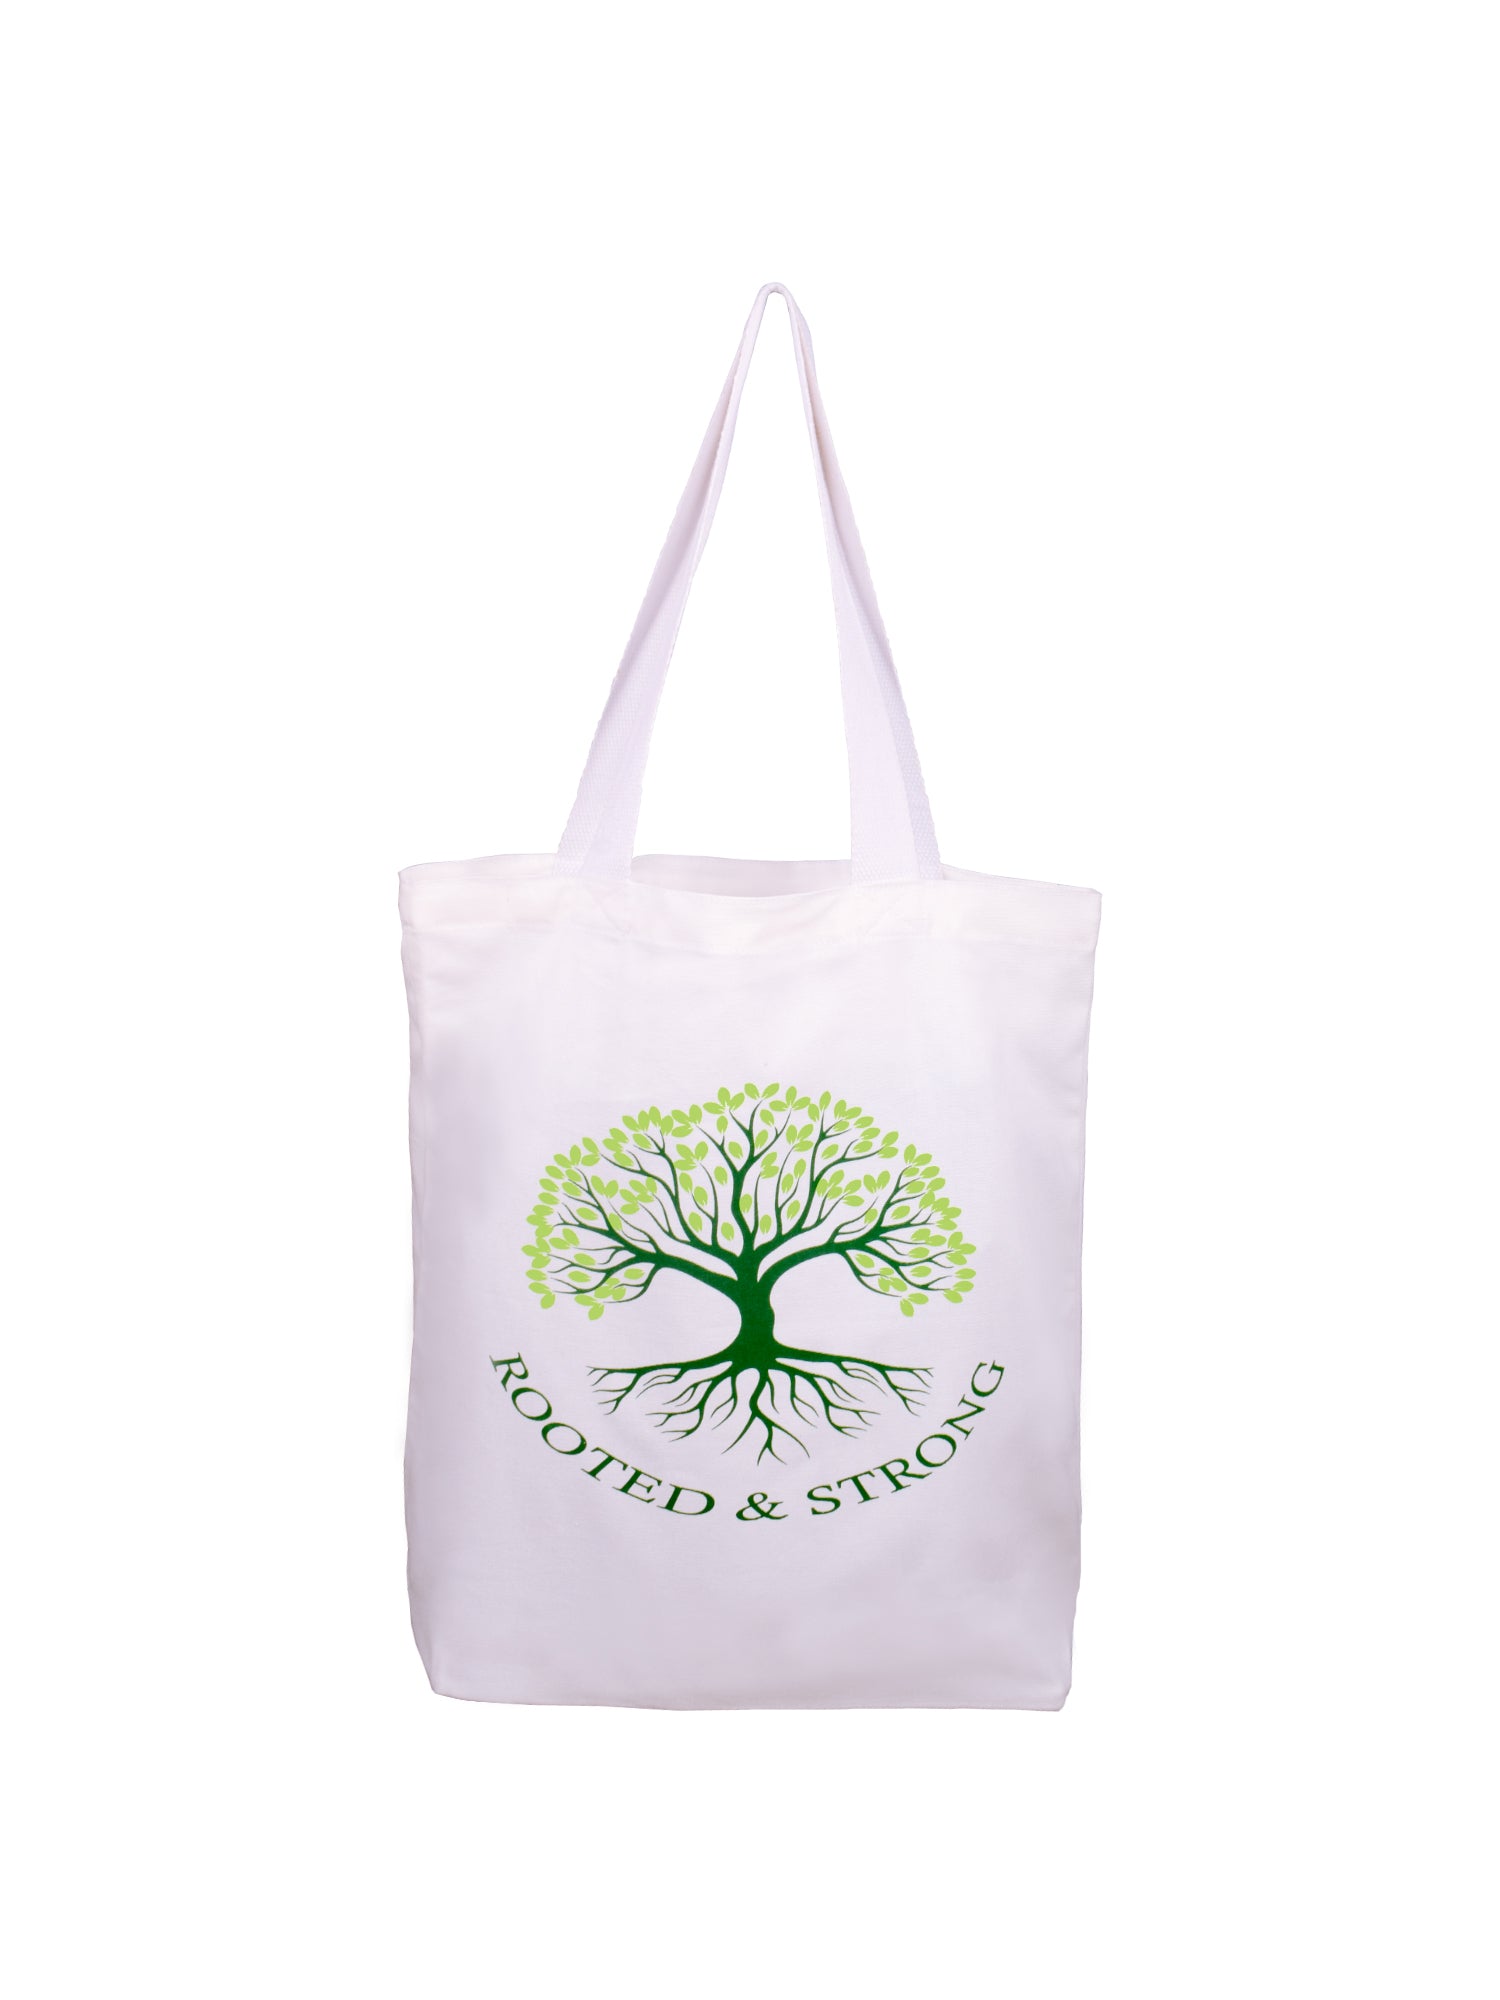 Doodle Rooted and Strong Tote Bag